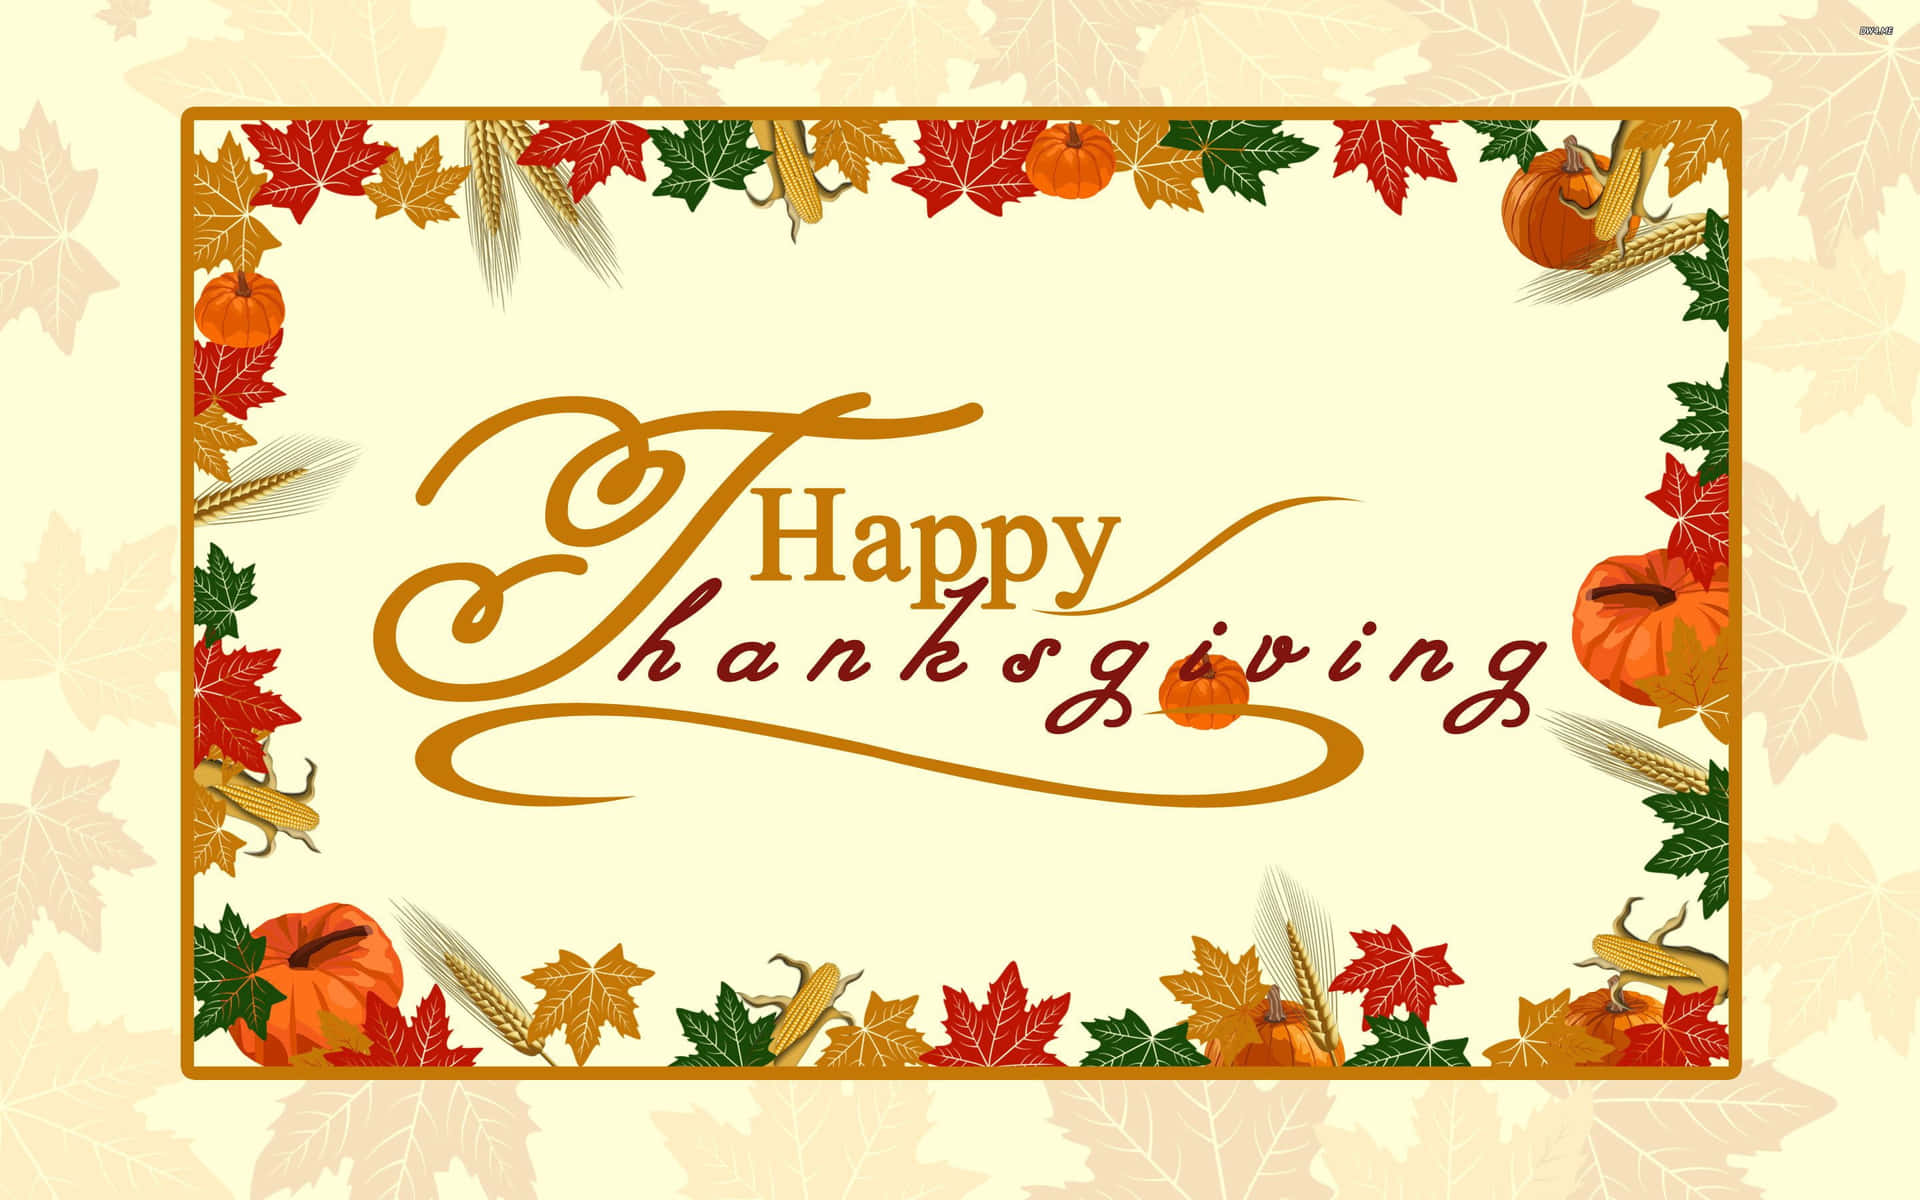 Download Beautiful Artistic Thanksgiving Card Picture | Wallpapers.com